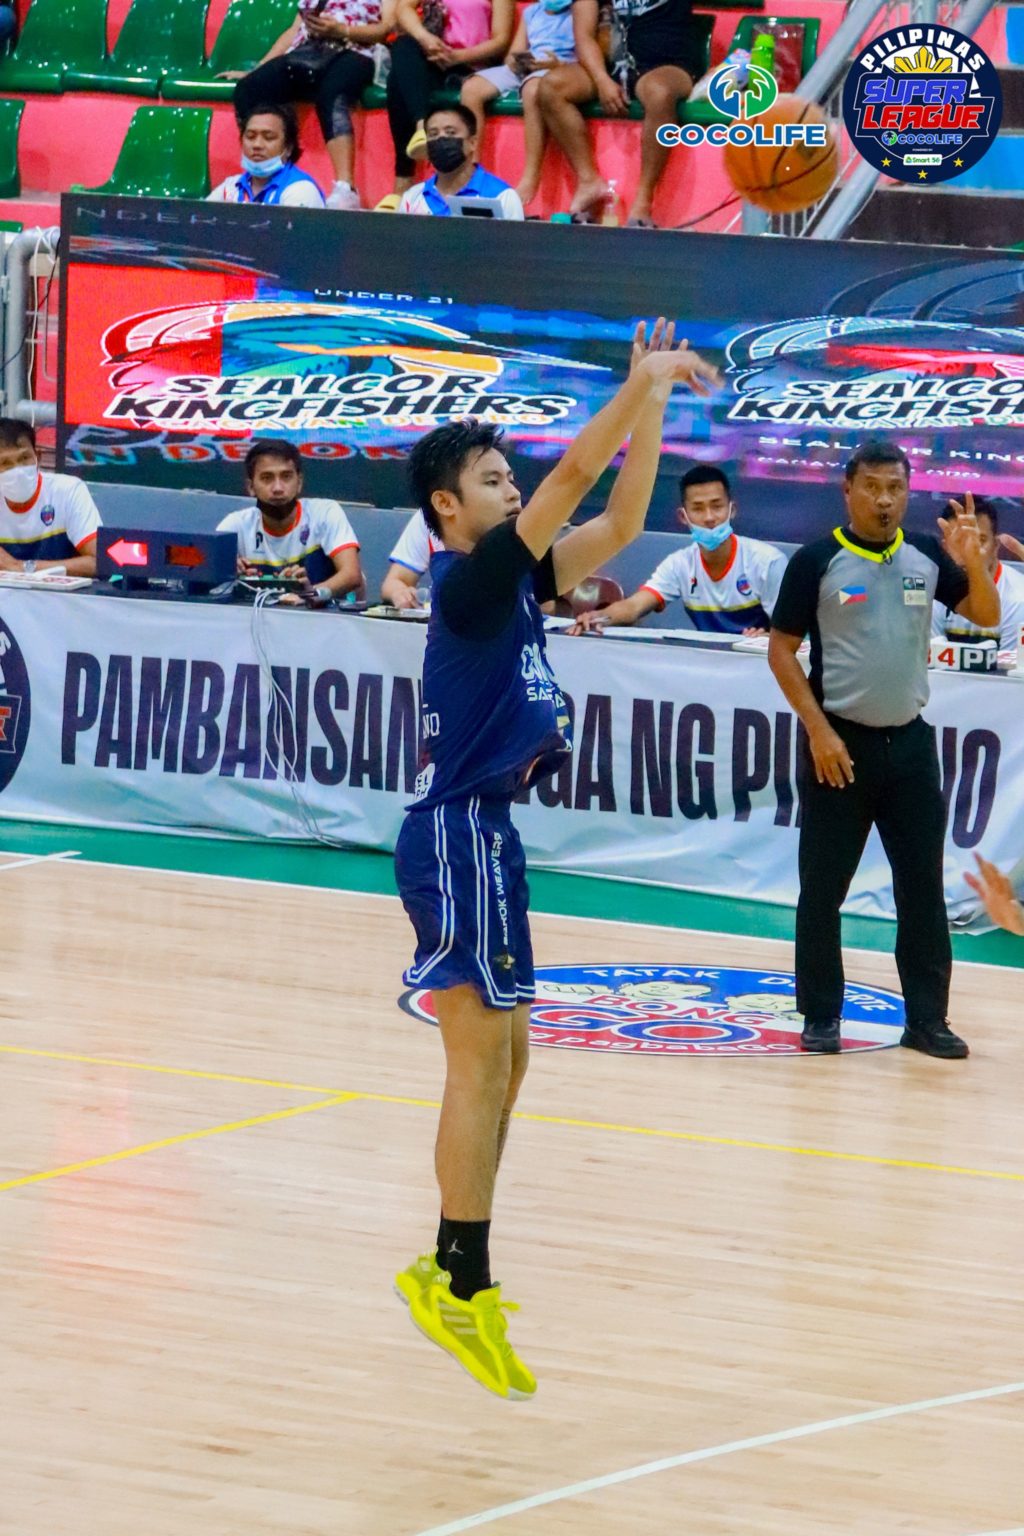 CONSOLACION SAROK WEAVERS WIN. Consolacion's Gyle Patrick Montaño fires a three-point shot during their game versus the Iligan City Archangels in the PSL U21 Aspirant's Division Cup. | Photo from PSL Media Bureau.